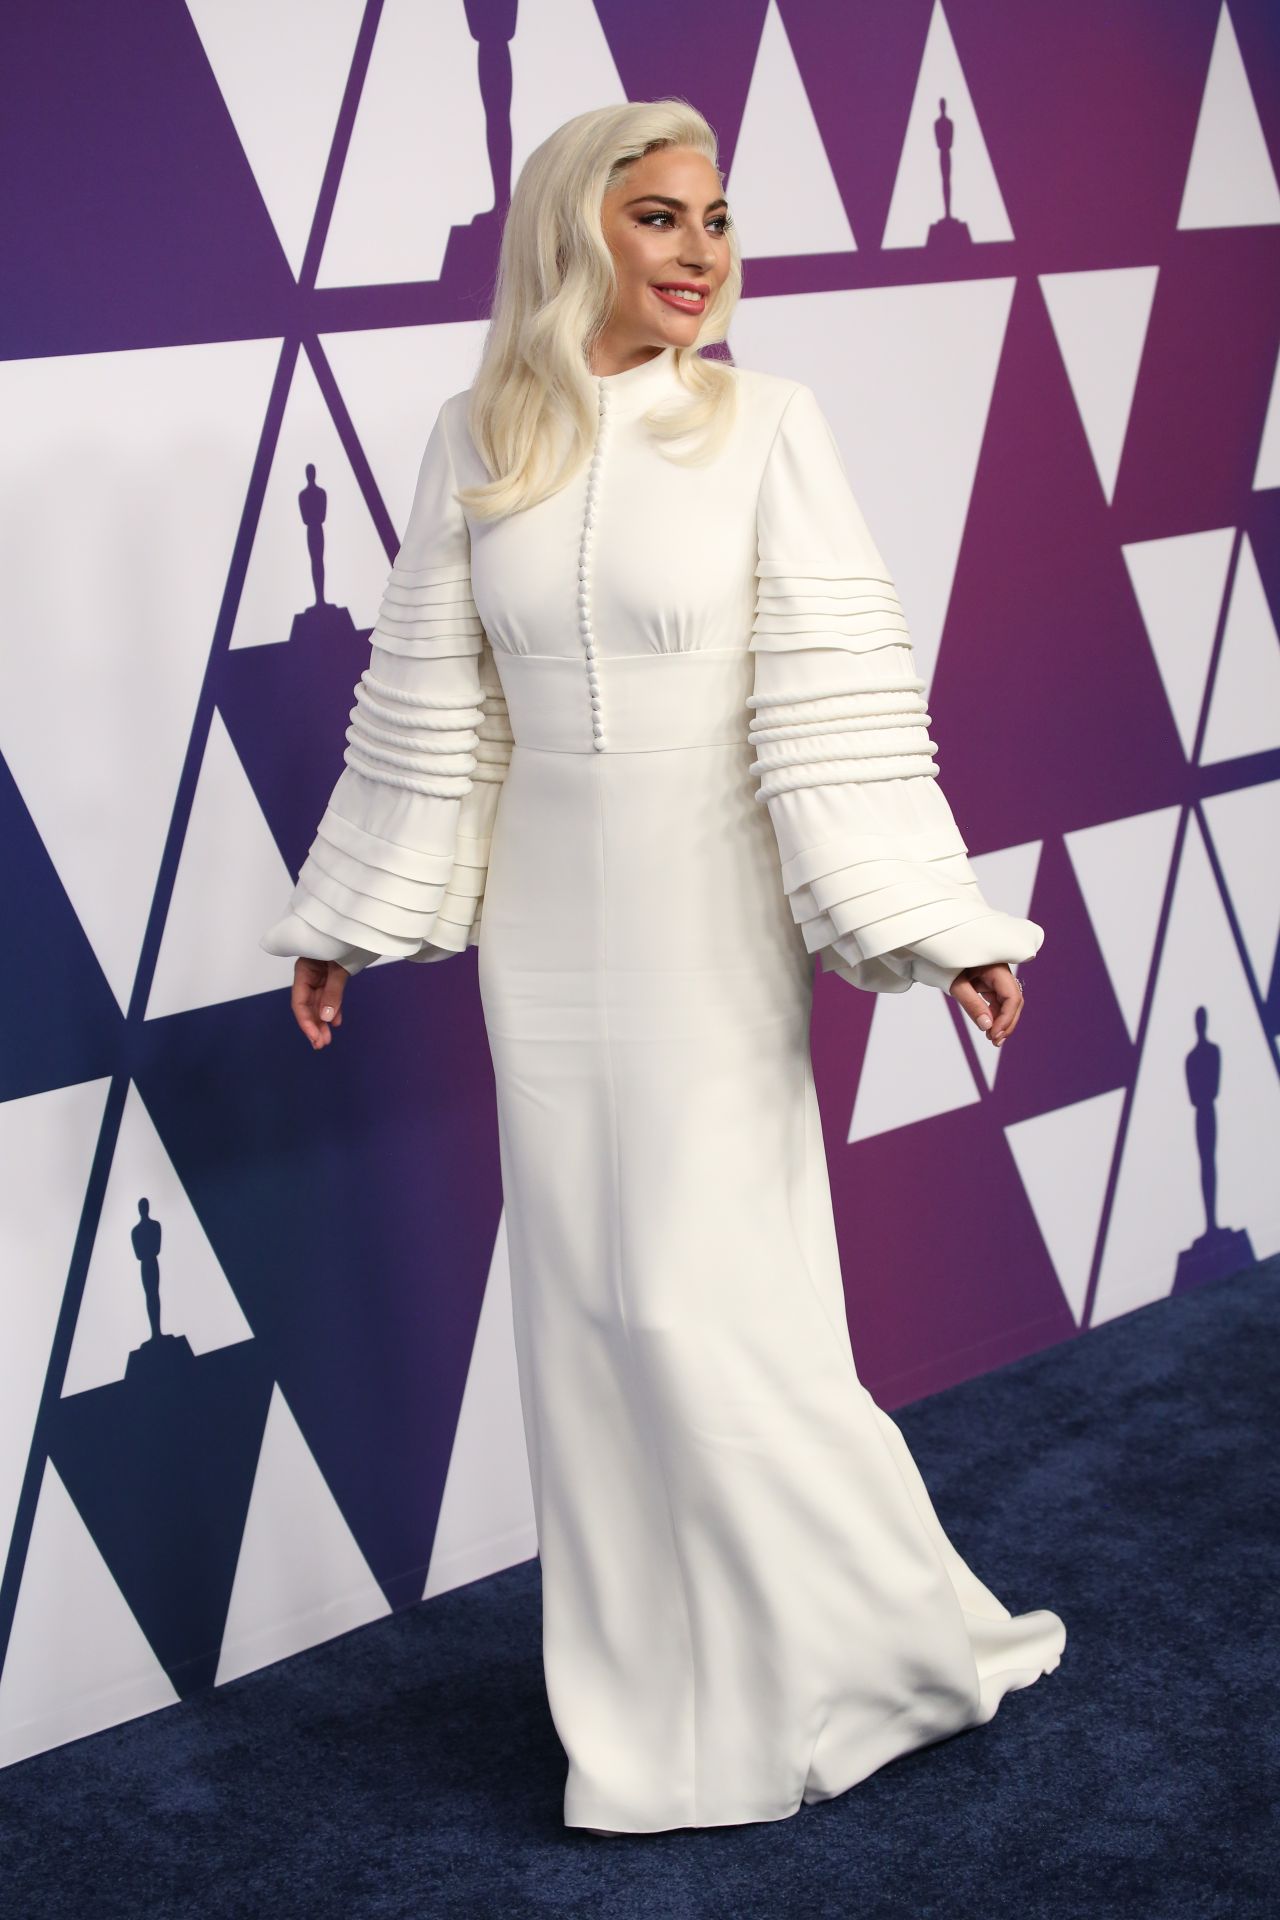 https://celebmafia.com/wp-content/uploads/2019/02/lady-gaga-91st-oscars-nominees-luncheon-in-beverly-hills-6.jpg